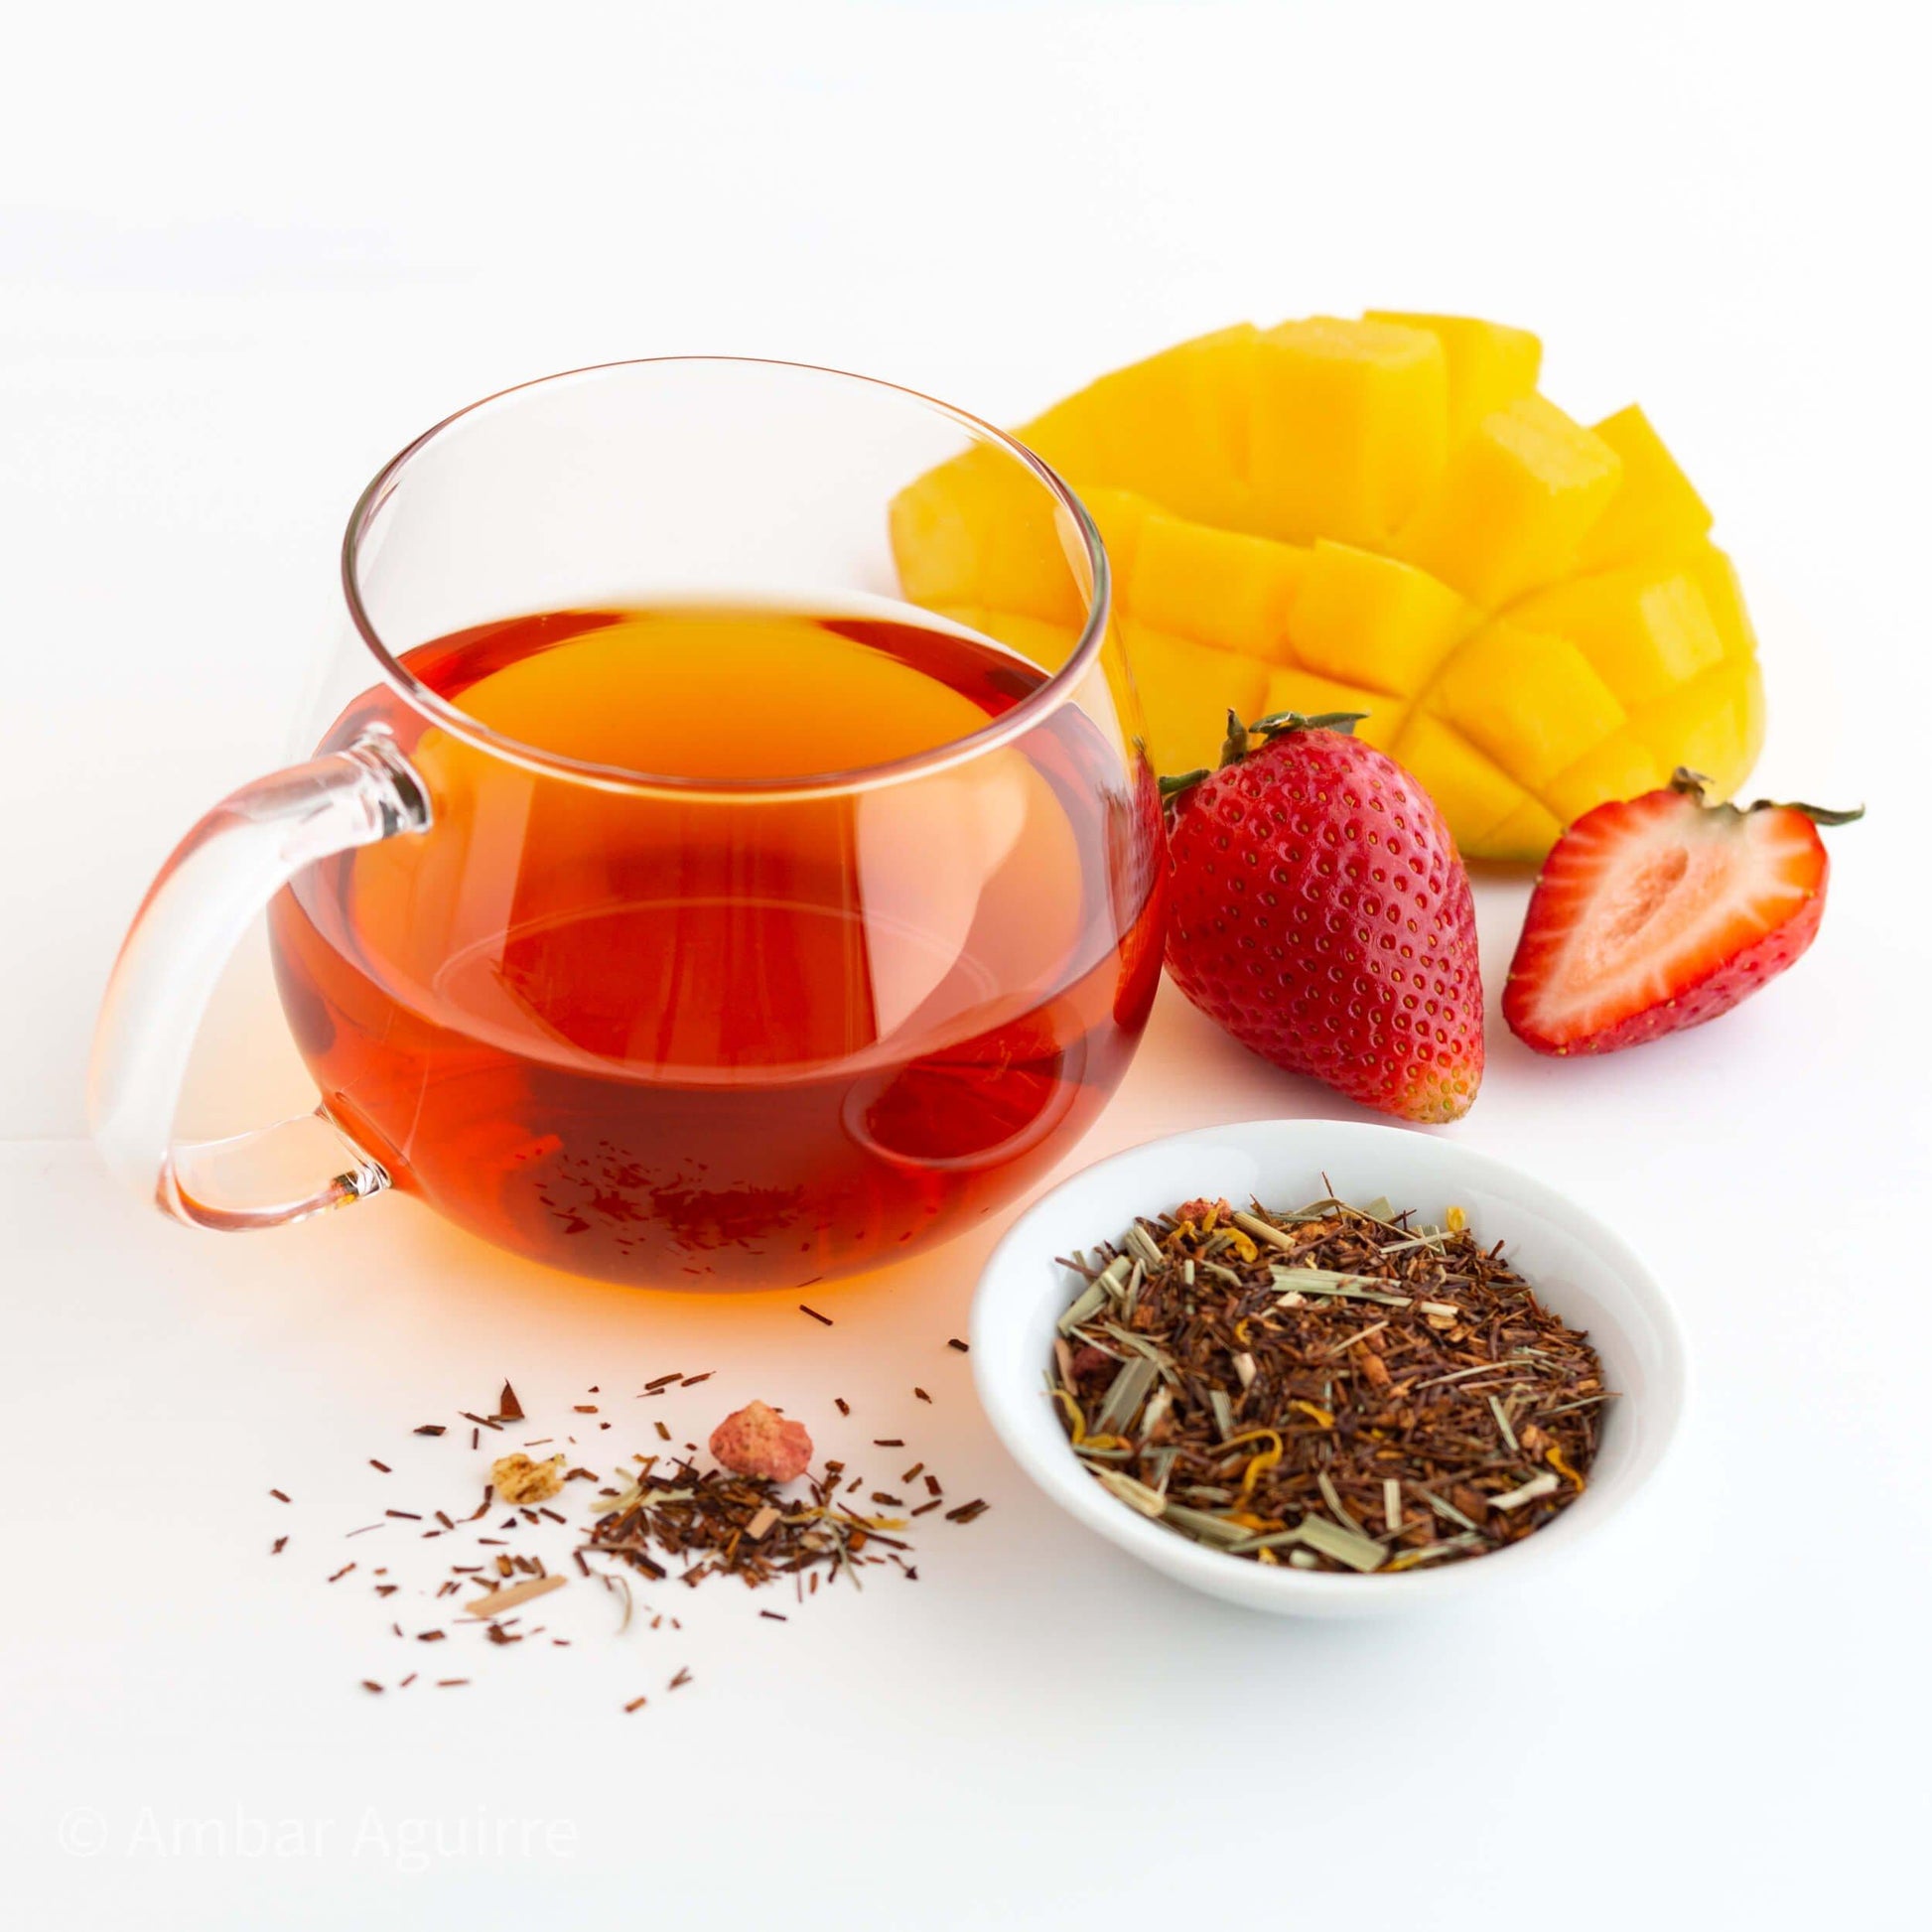 Organic Double Red® Rooibos Tea Bags